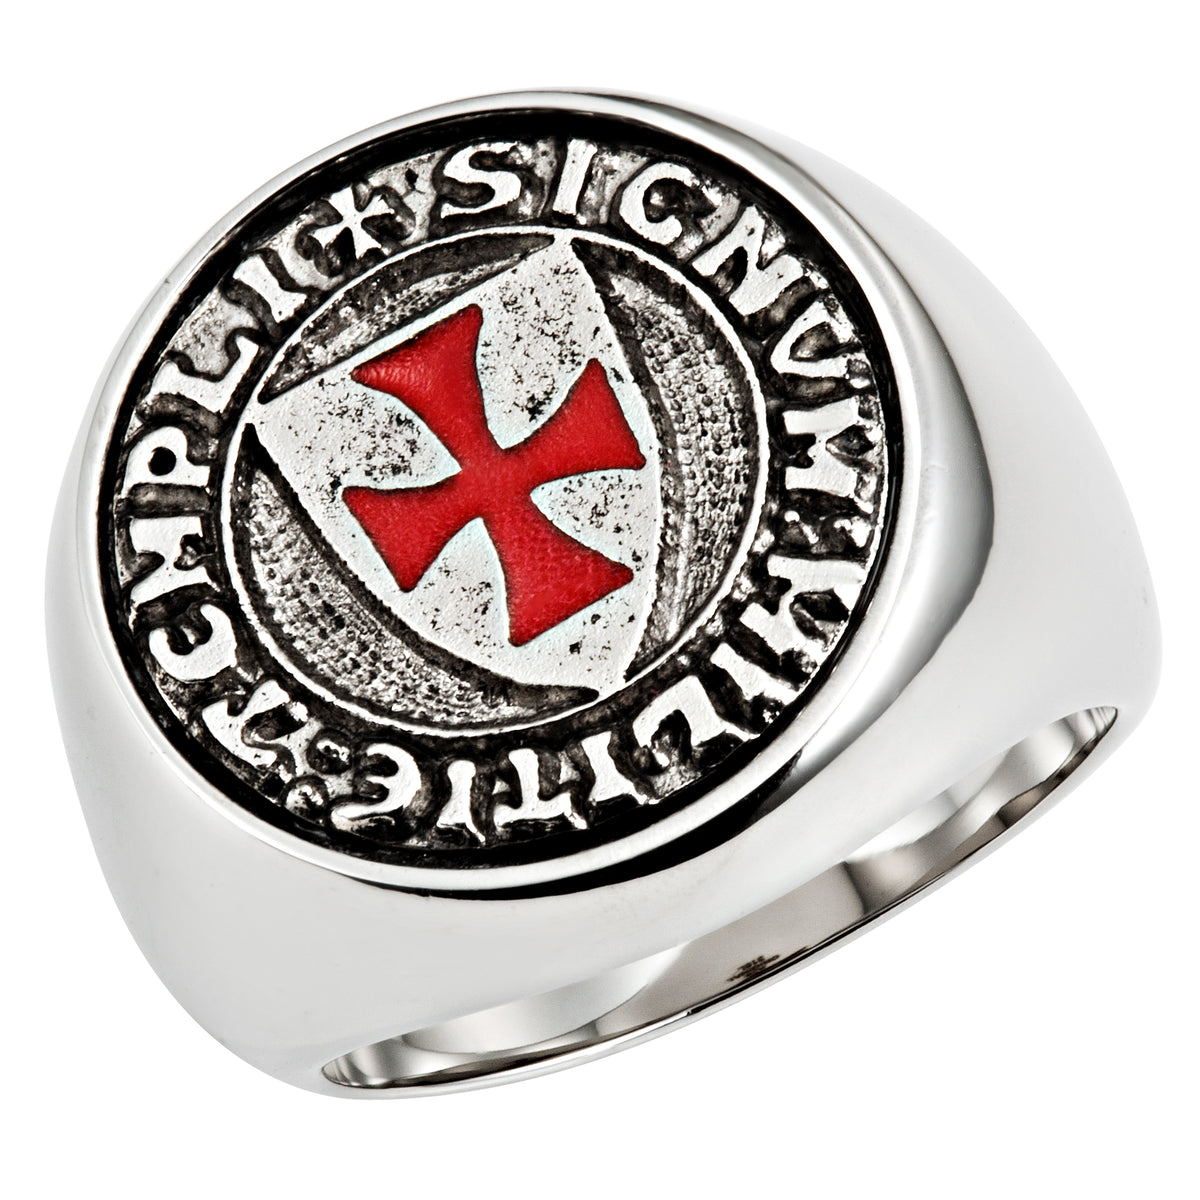 Stainless Steel Knights Templar Ring with Latin Engraving